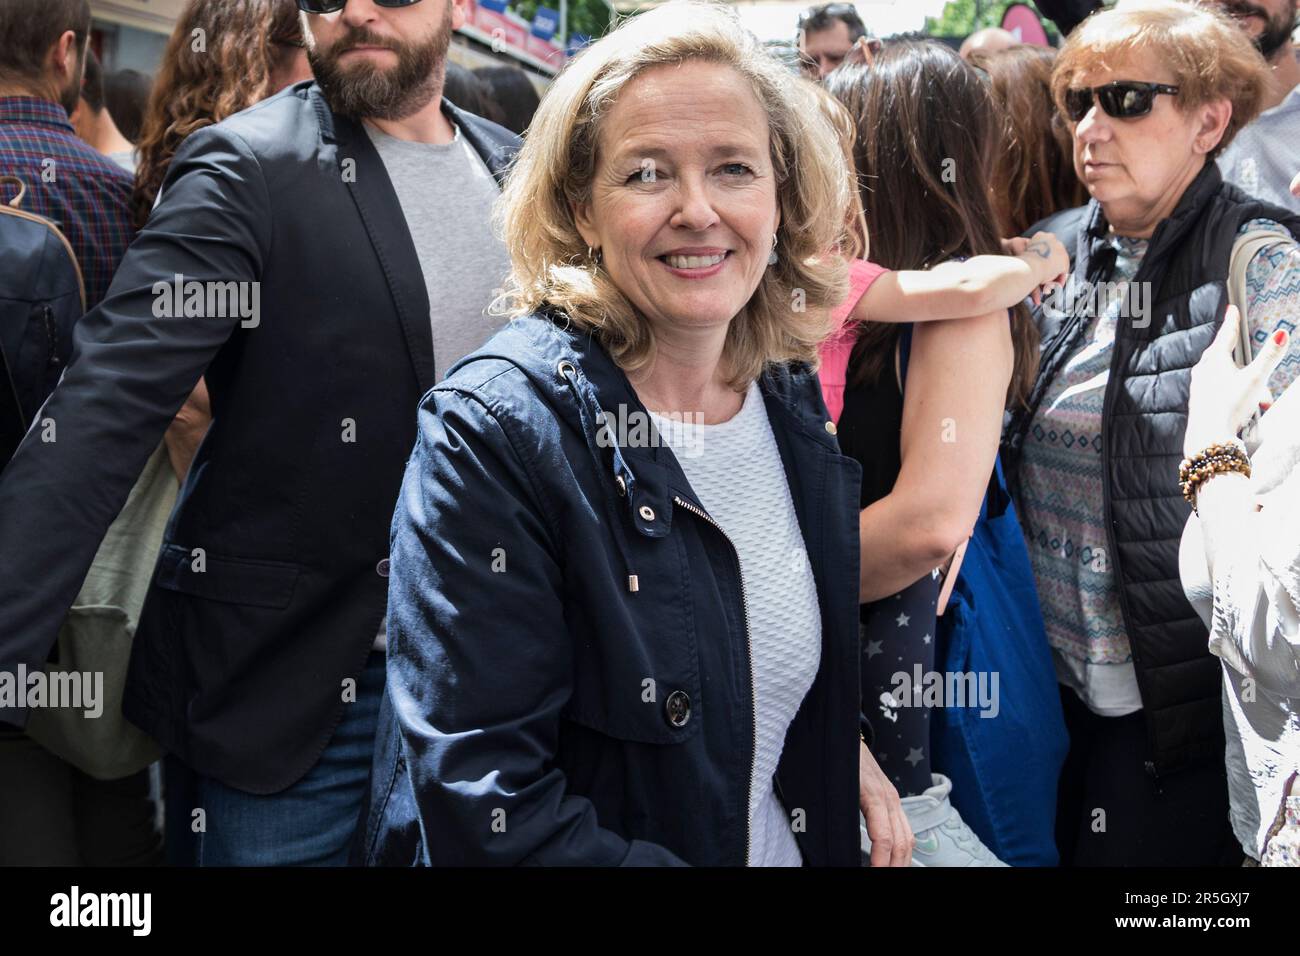 NADIA CALVIÑO VICE PRESIDENT OF THE GOVERNMENT AT THE 82ND EDITION OF THE BOOK FAIR IN EL RETIRO PARK MADRID Credit: agefotostock /Alamy Live News Stock Photo